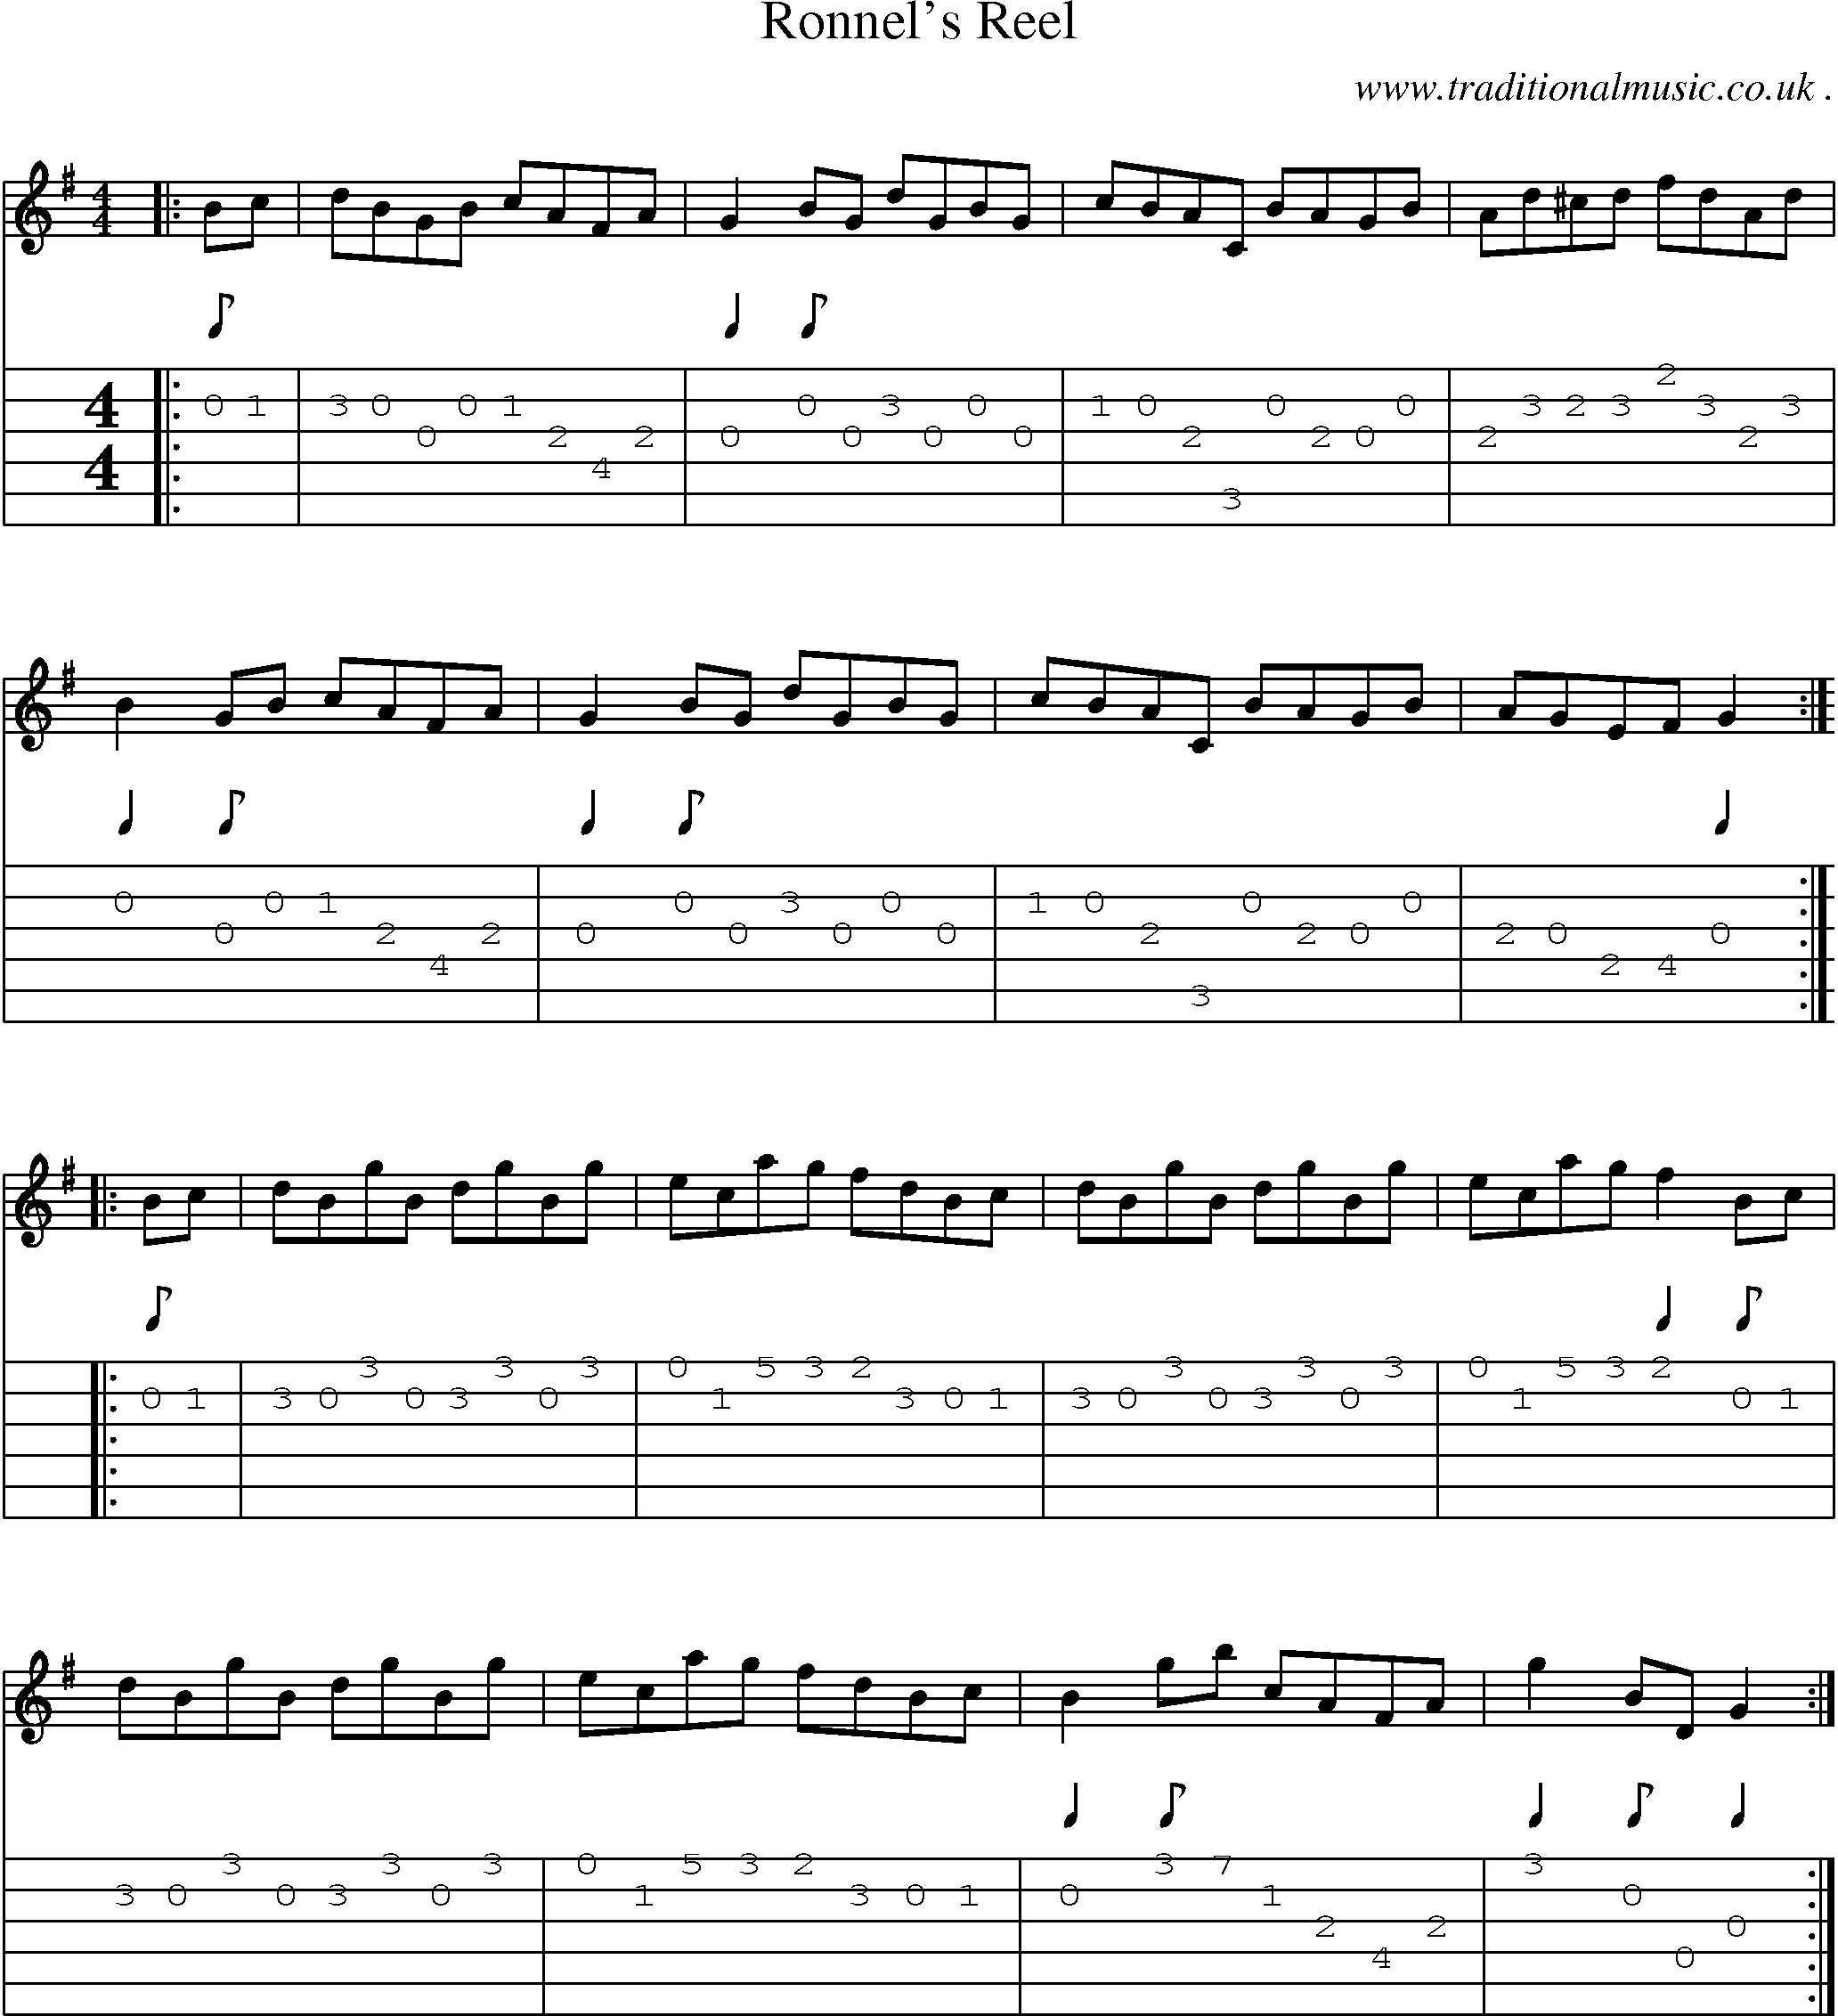 Sheet-Music and Guitar Tabs for Ronnels Reel